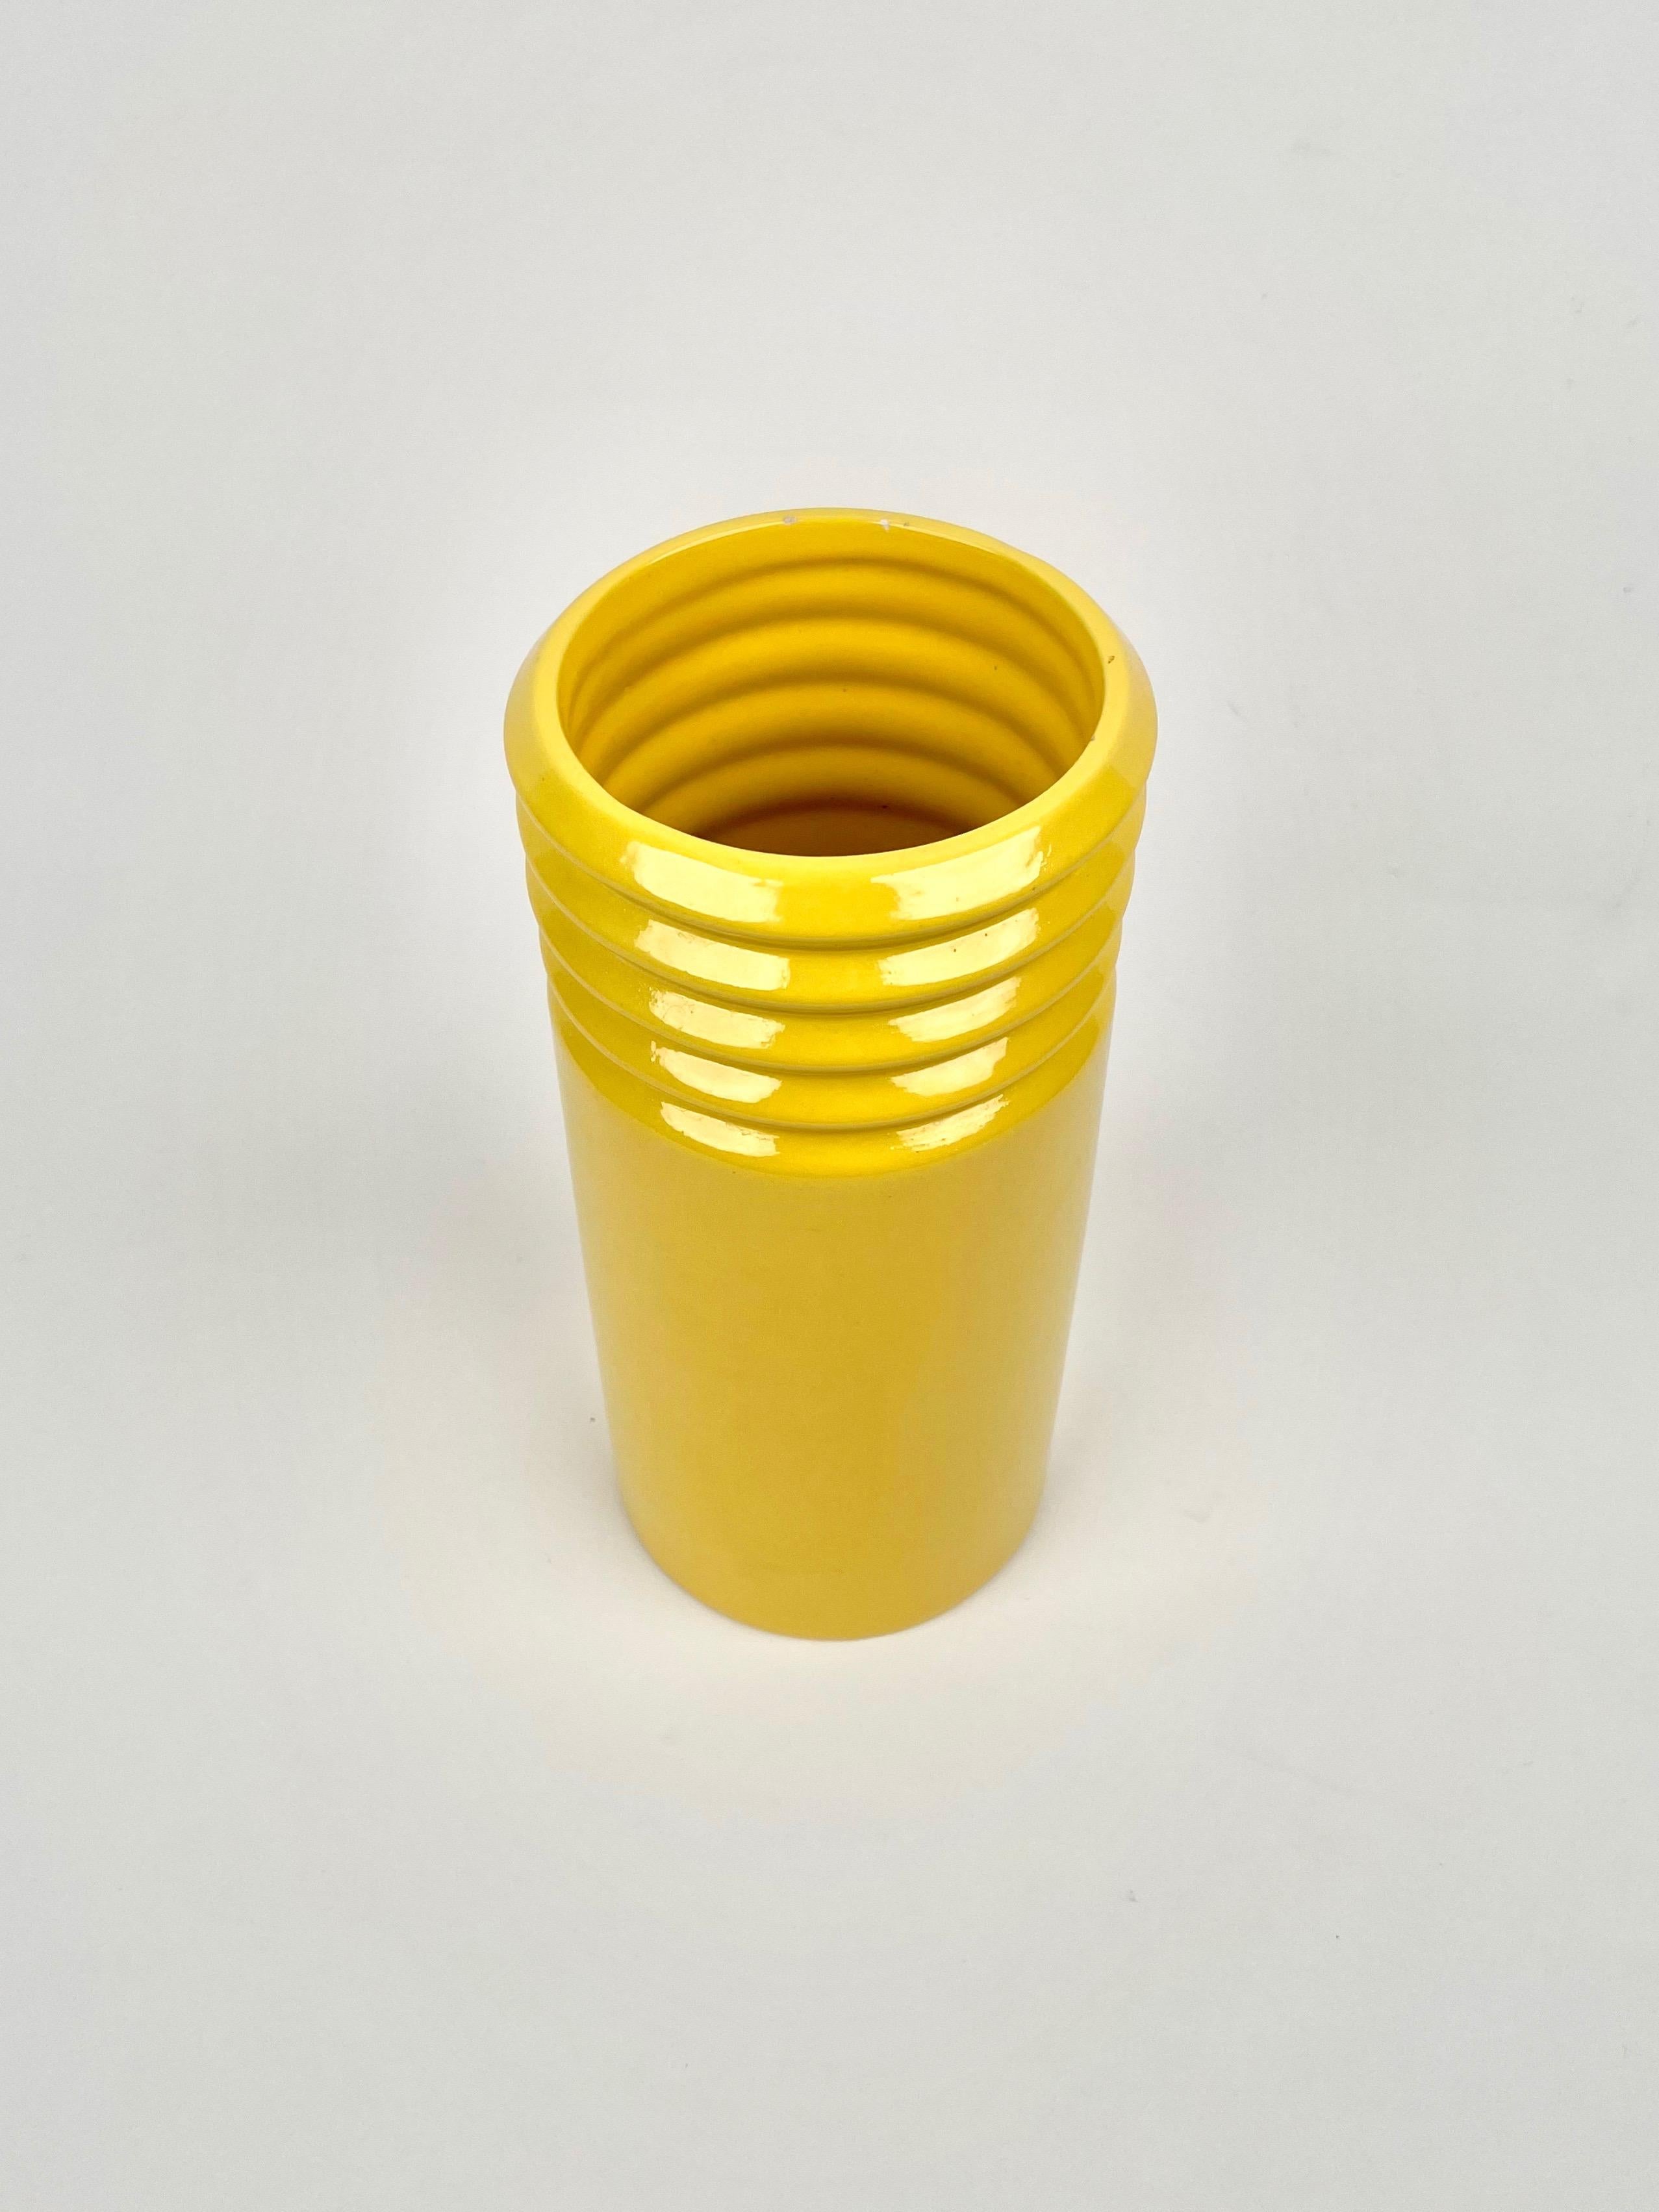 Mid-20th Century Yellow Ceramic Cylindric Vase by Il Picchio, Italy, 1960s For Sale